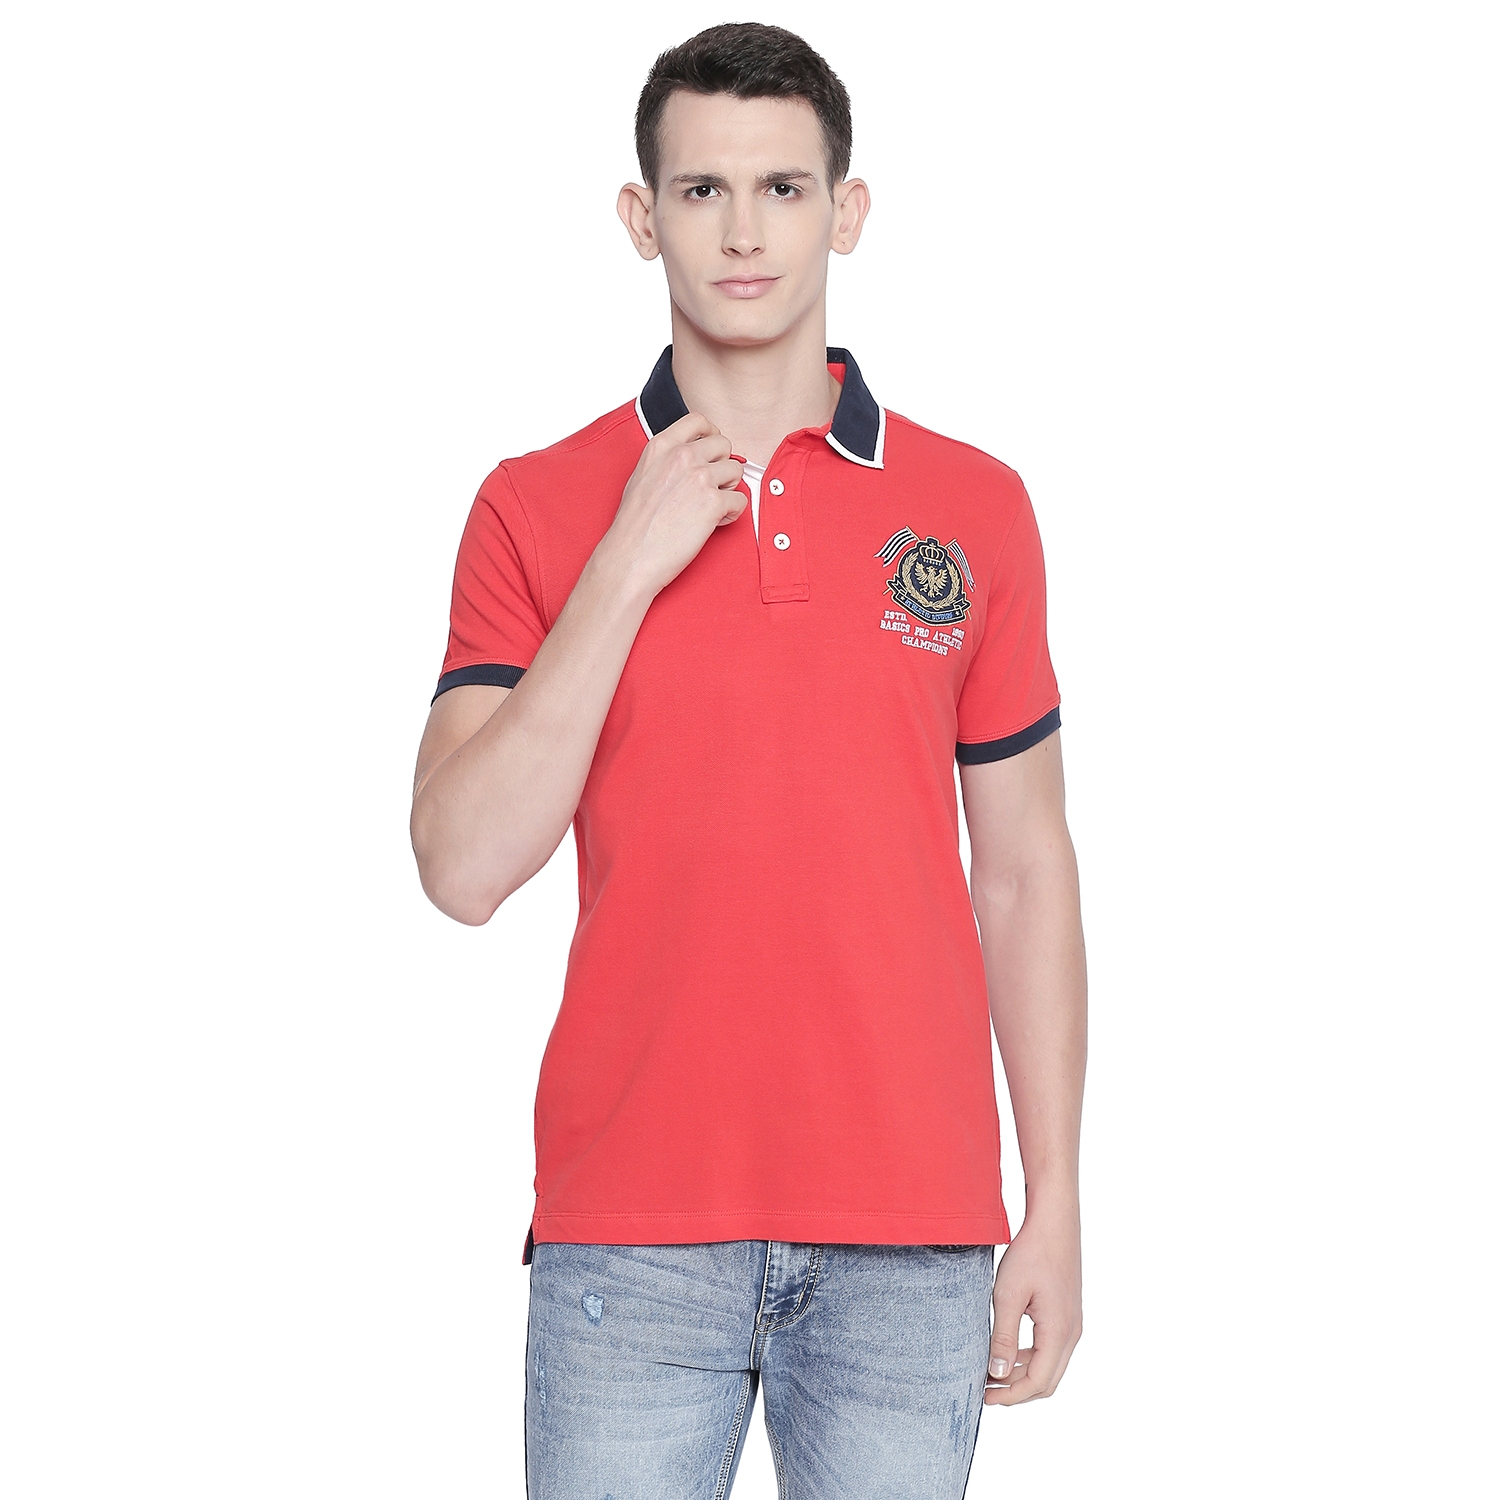 Basics | Basics Muscle Fit Fiery Red Rugby Polo T Shirt